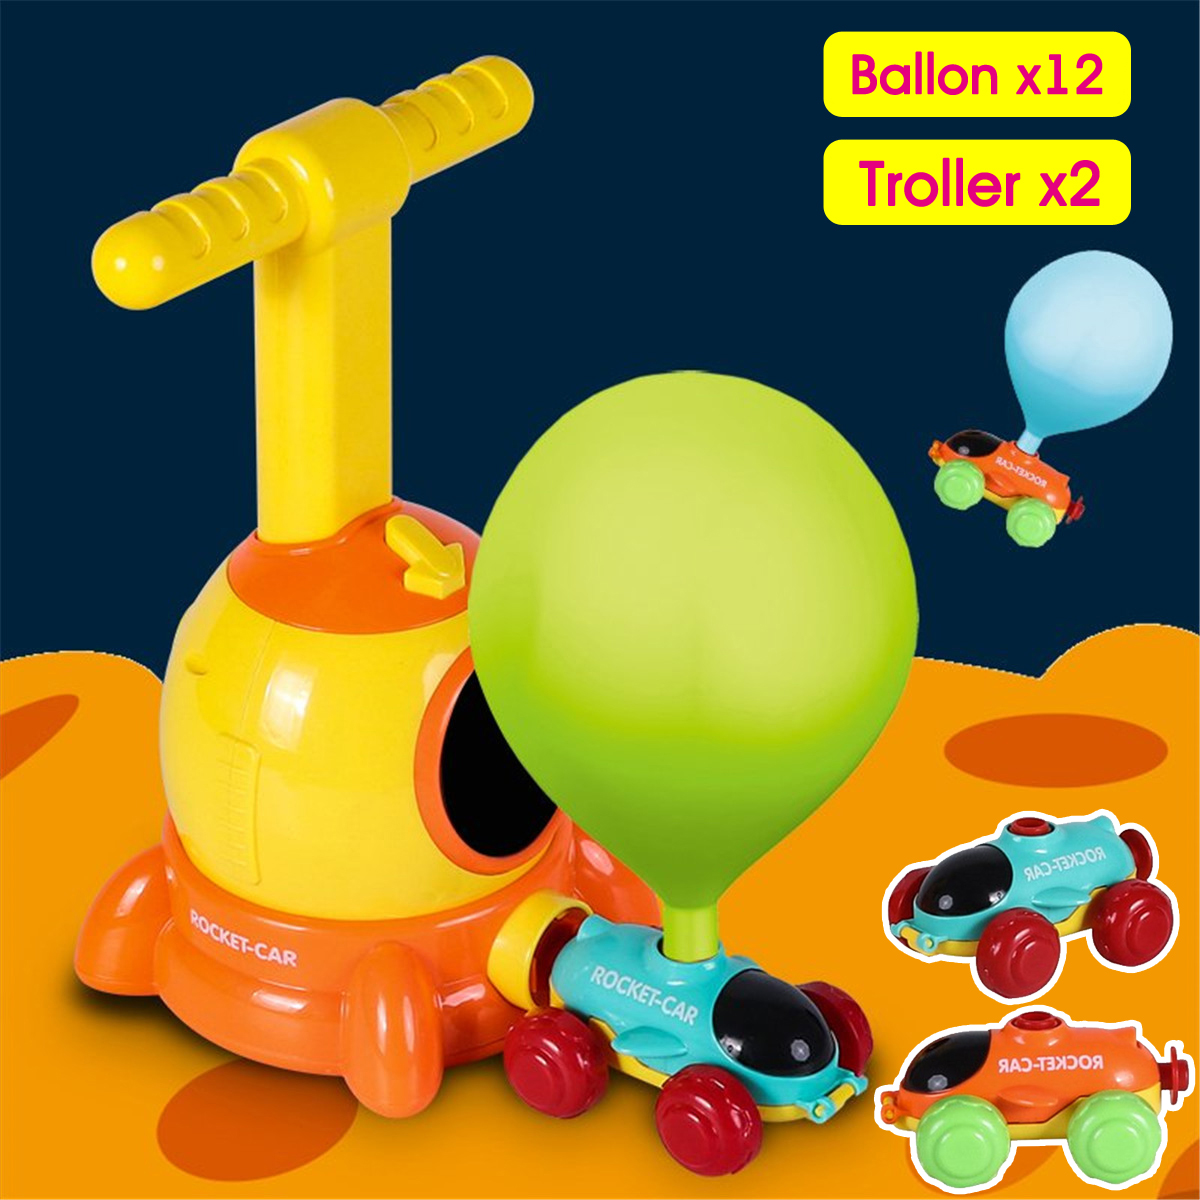 Inertial-Power-Balloon-Car-Intellectual-Development-Learning-Education-Science-Experiment-Toy-for-Ki-1698287-2